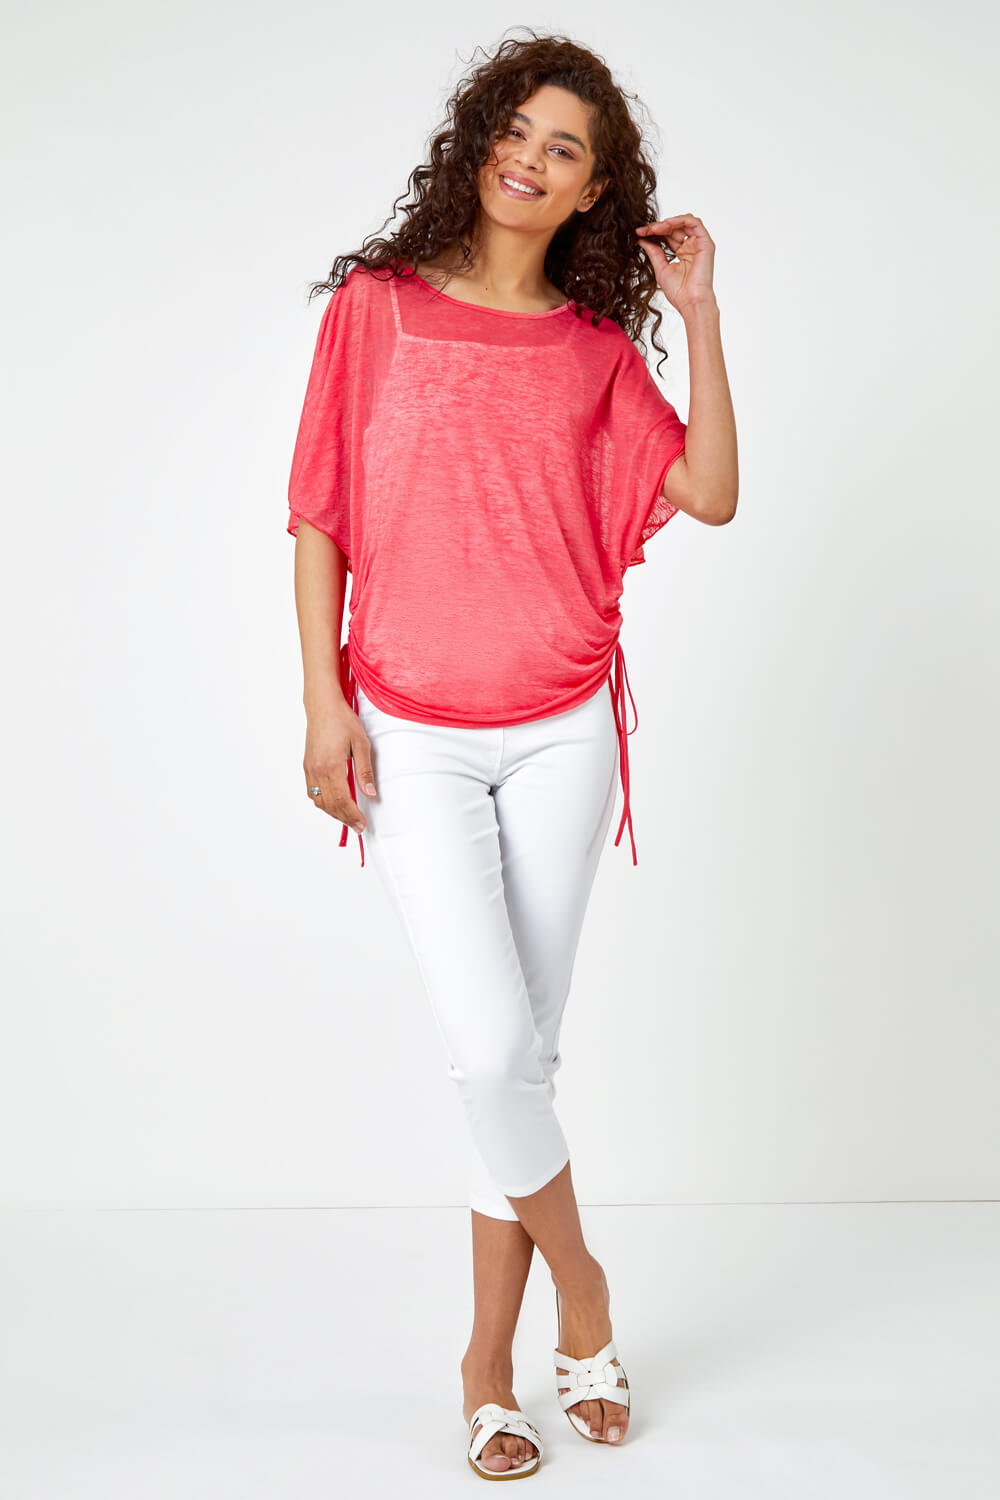 PINK Ruched Batwing Mesh Top, Image 2 of 5